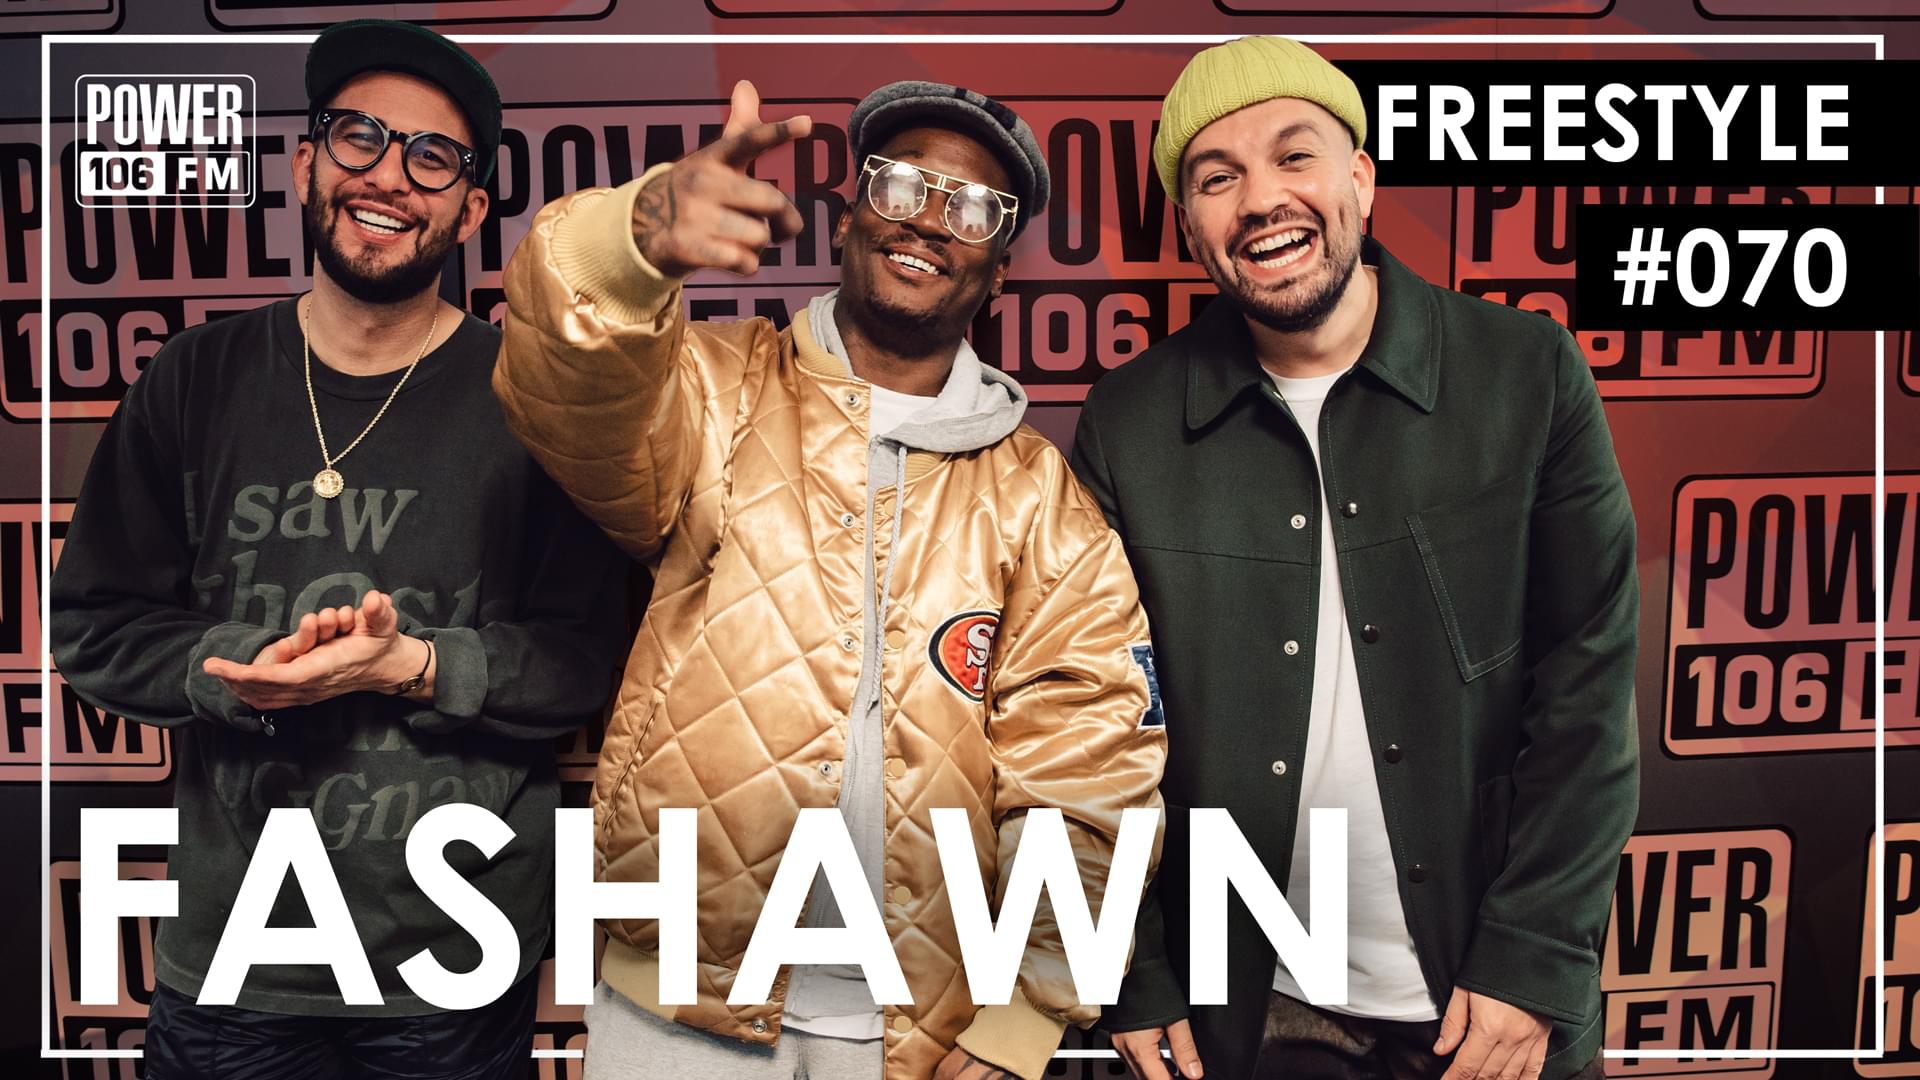 Fashawn Delivers Bars Over J. Cole’s “1985” Instrumental On #Freestyle070 [WATCH]